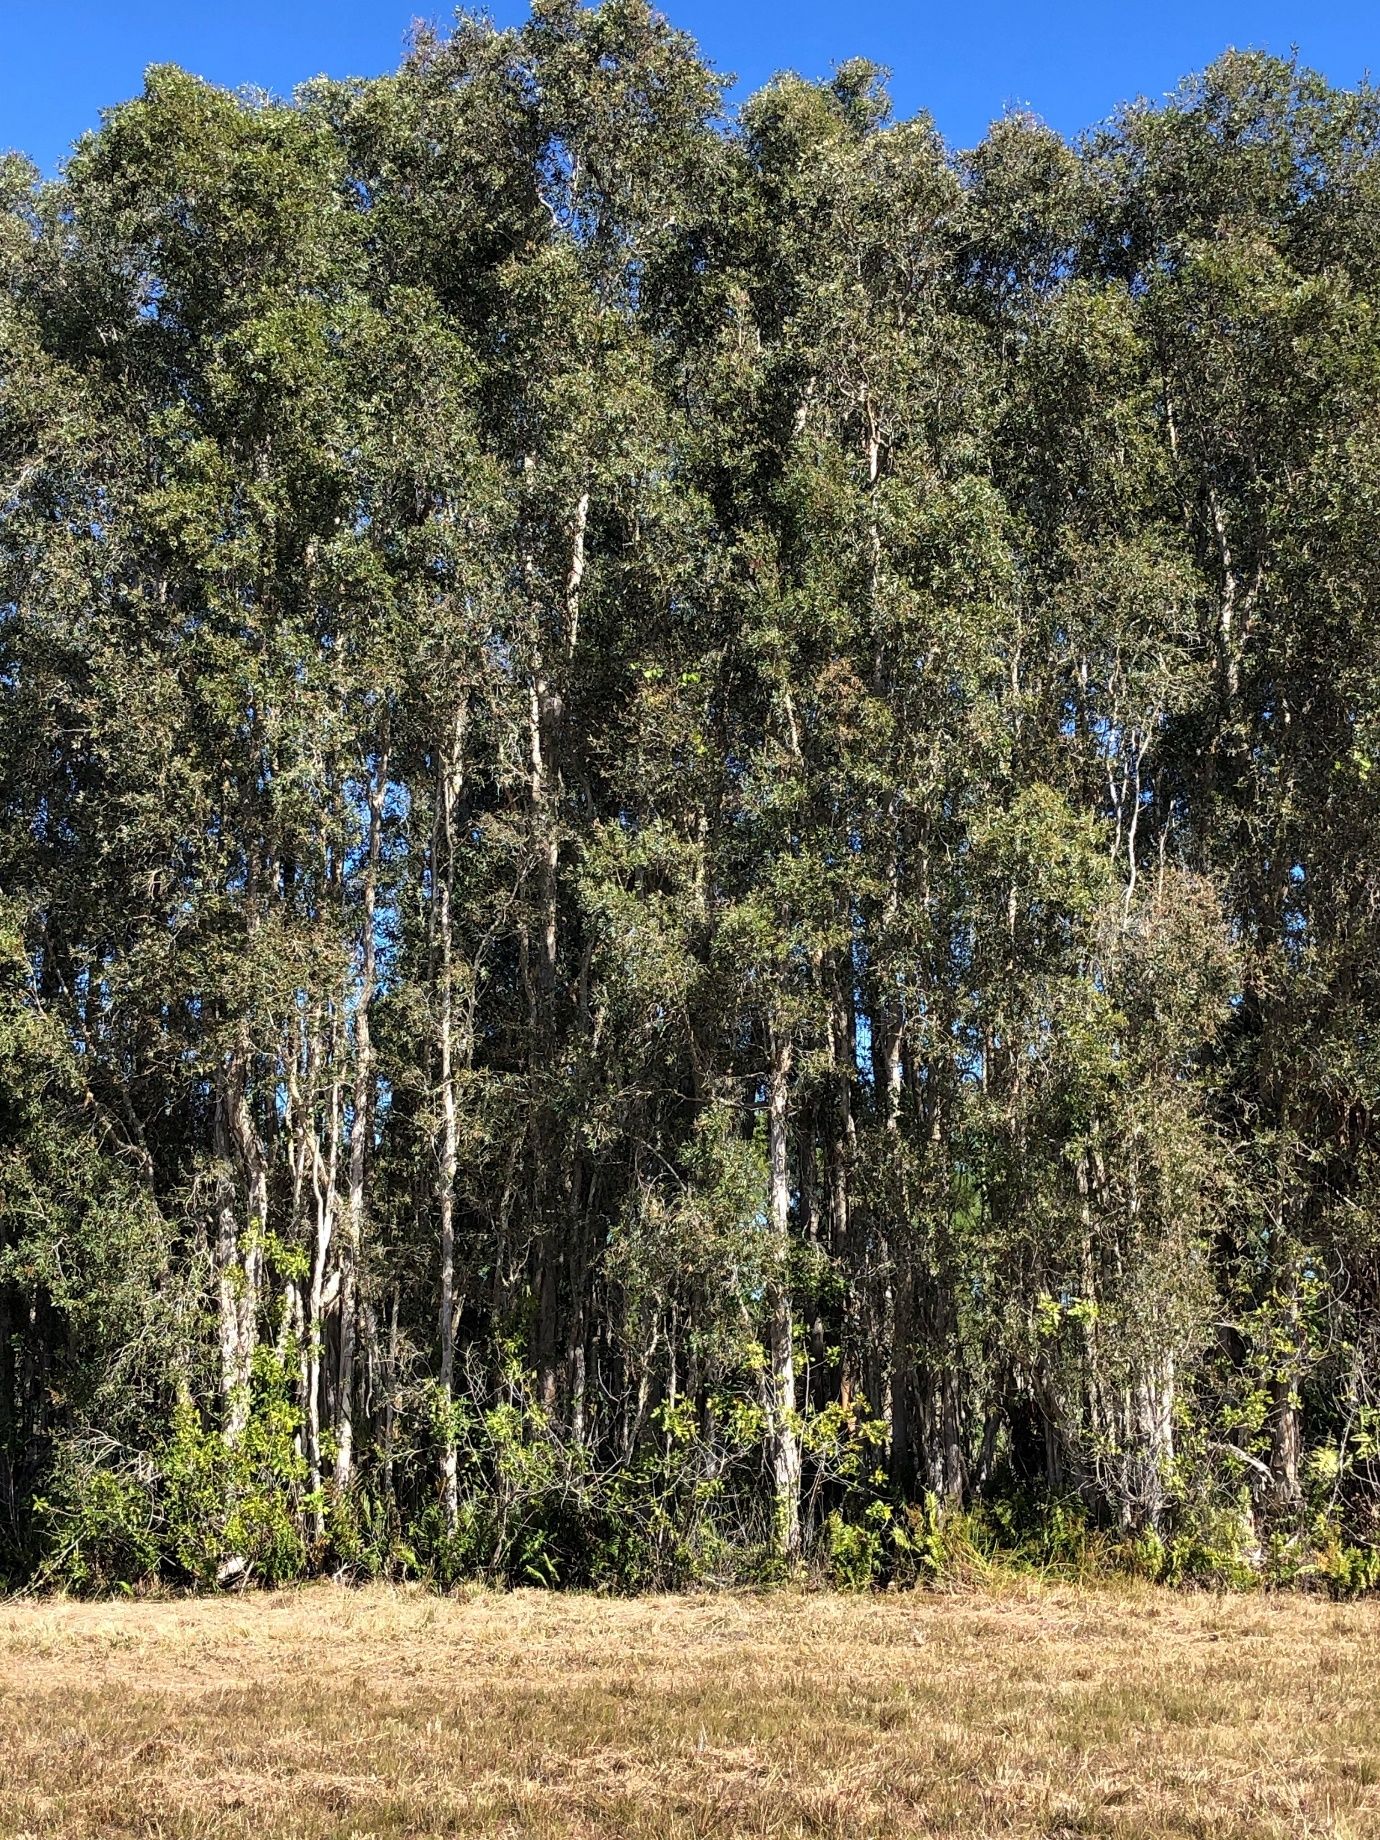 Stand of melaleuca trees in St. Lucie County, Florida. 